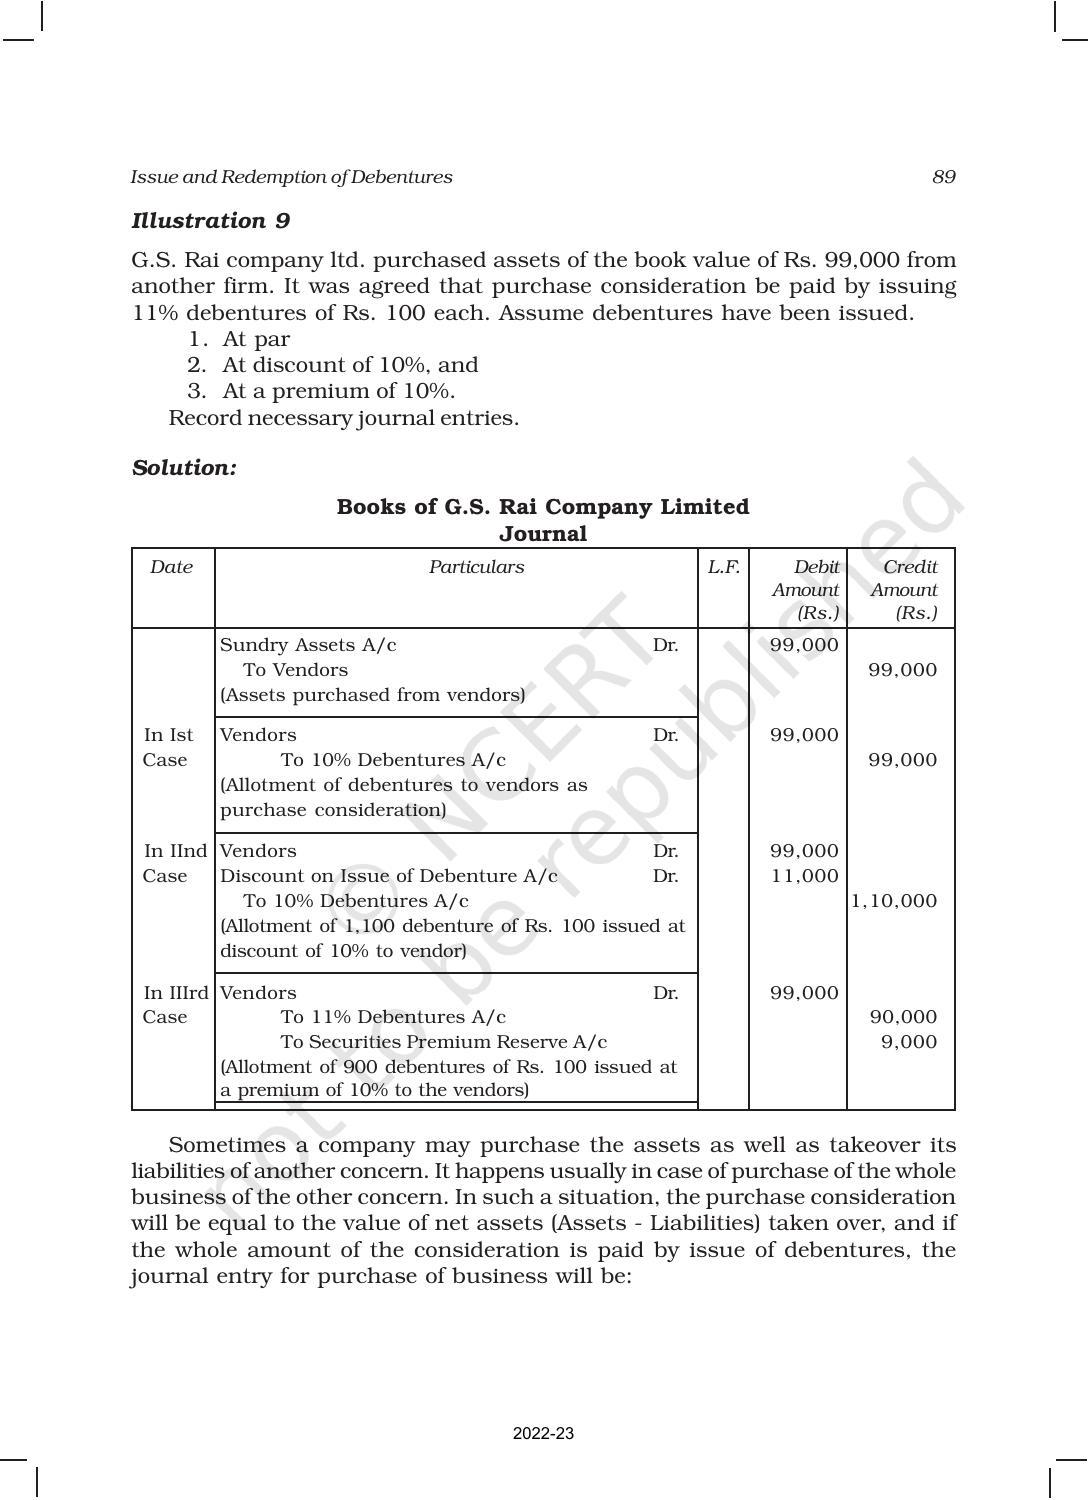 NCERT Book for Class 12 Accountancy Part II Chapter 1 Issue and Redemption of Debentures - Page 15